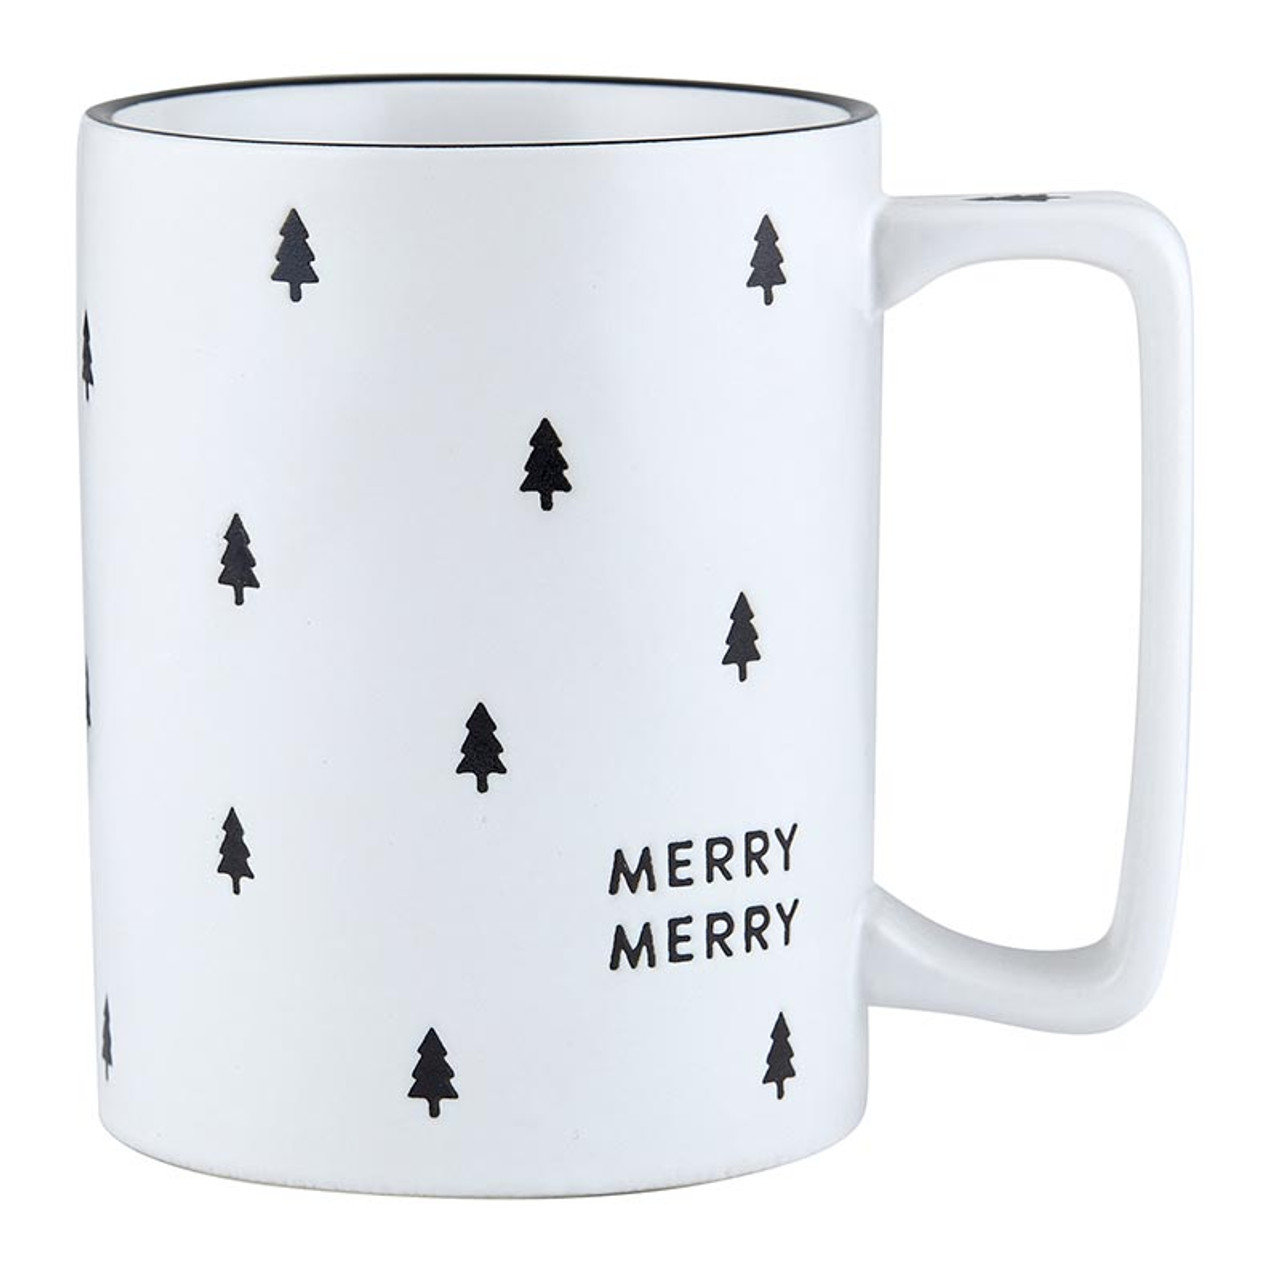 S'mores Stainless Steel Mugs - Party S'more - Santa Barbara Design